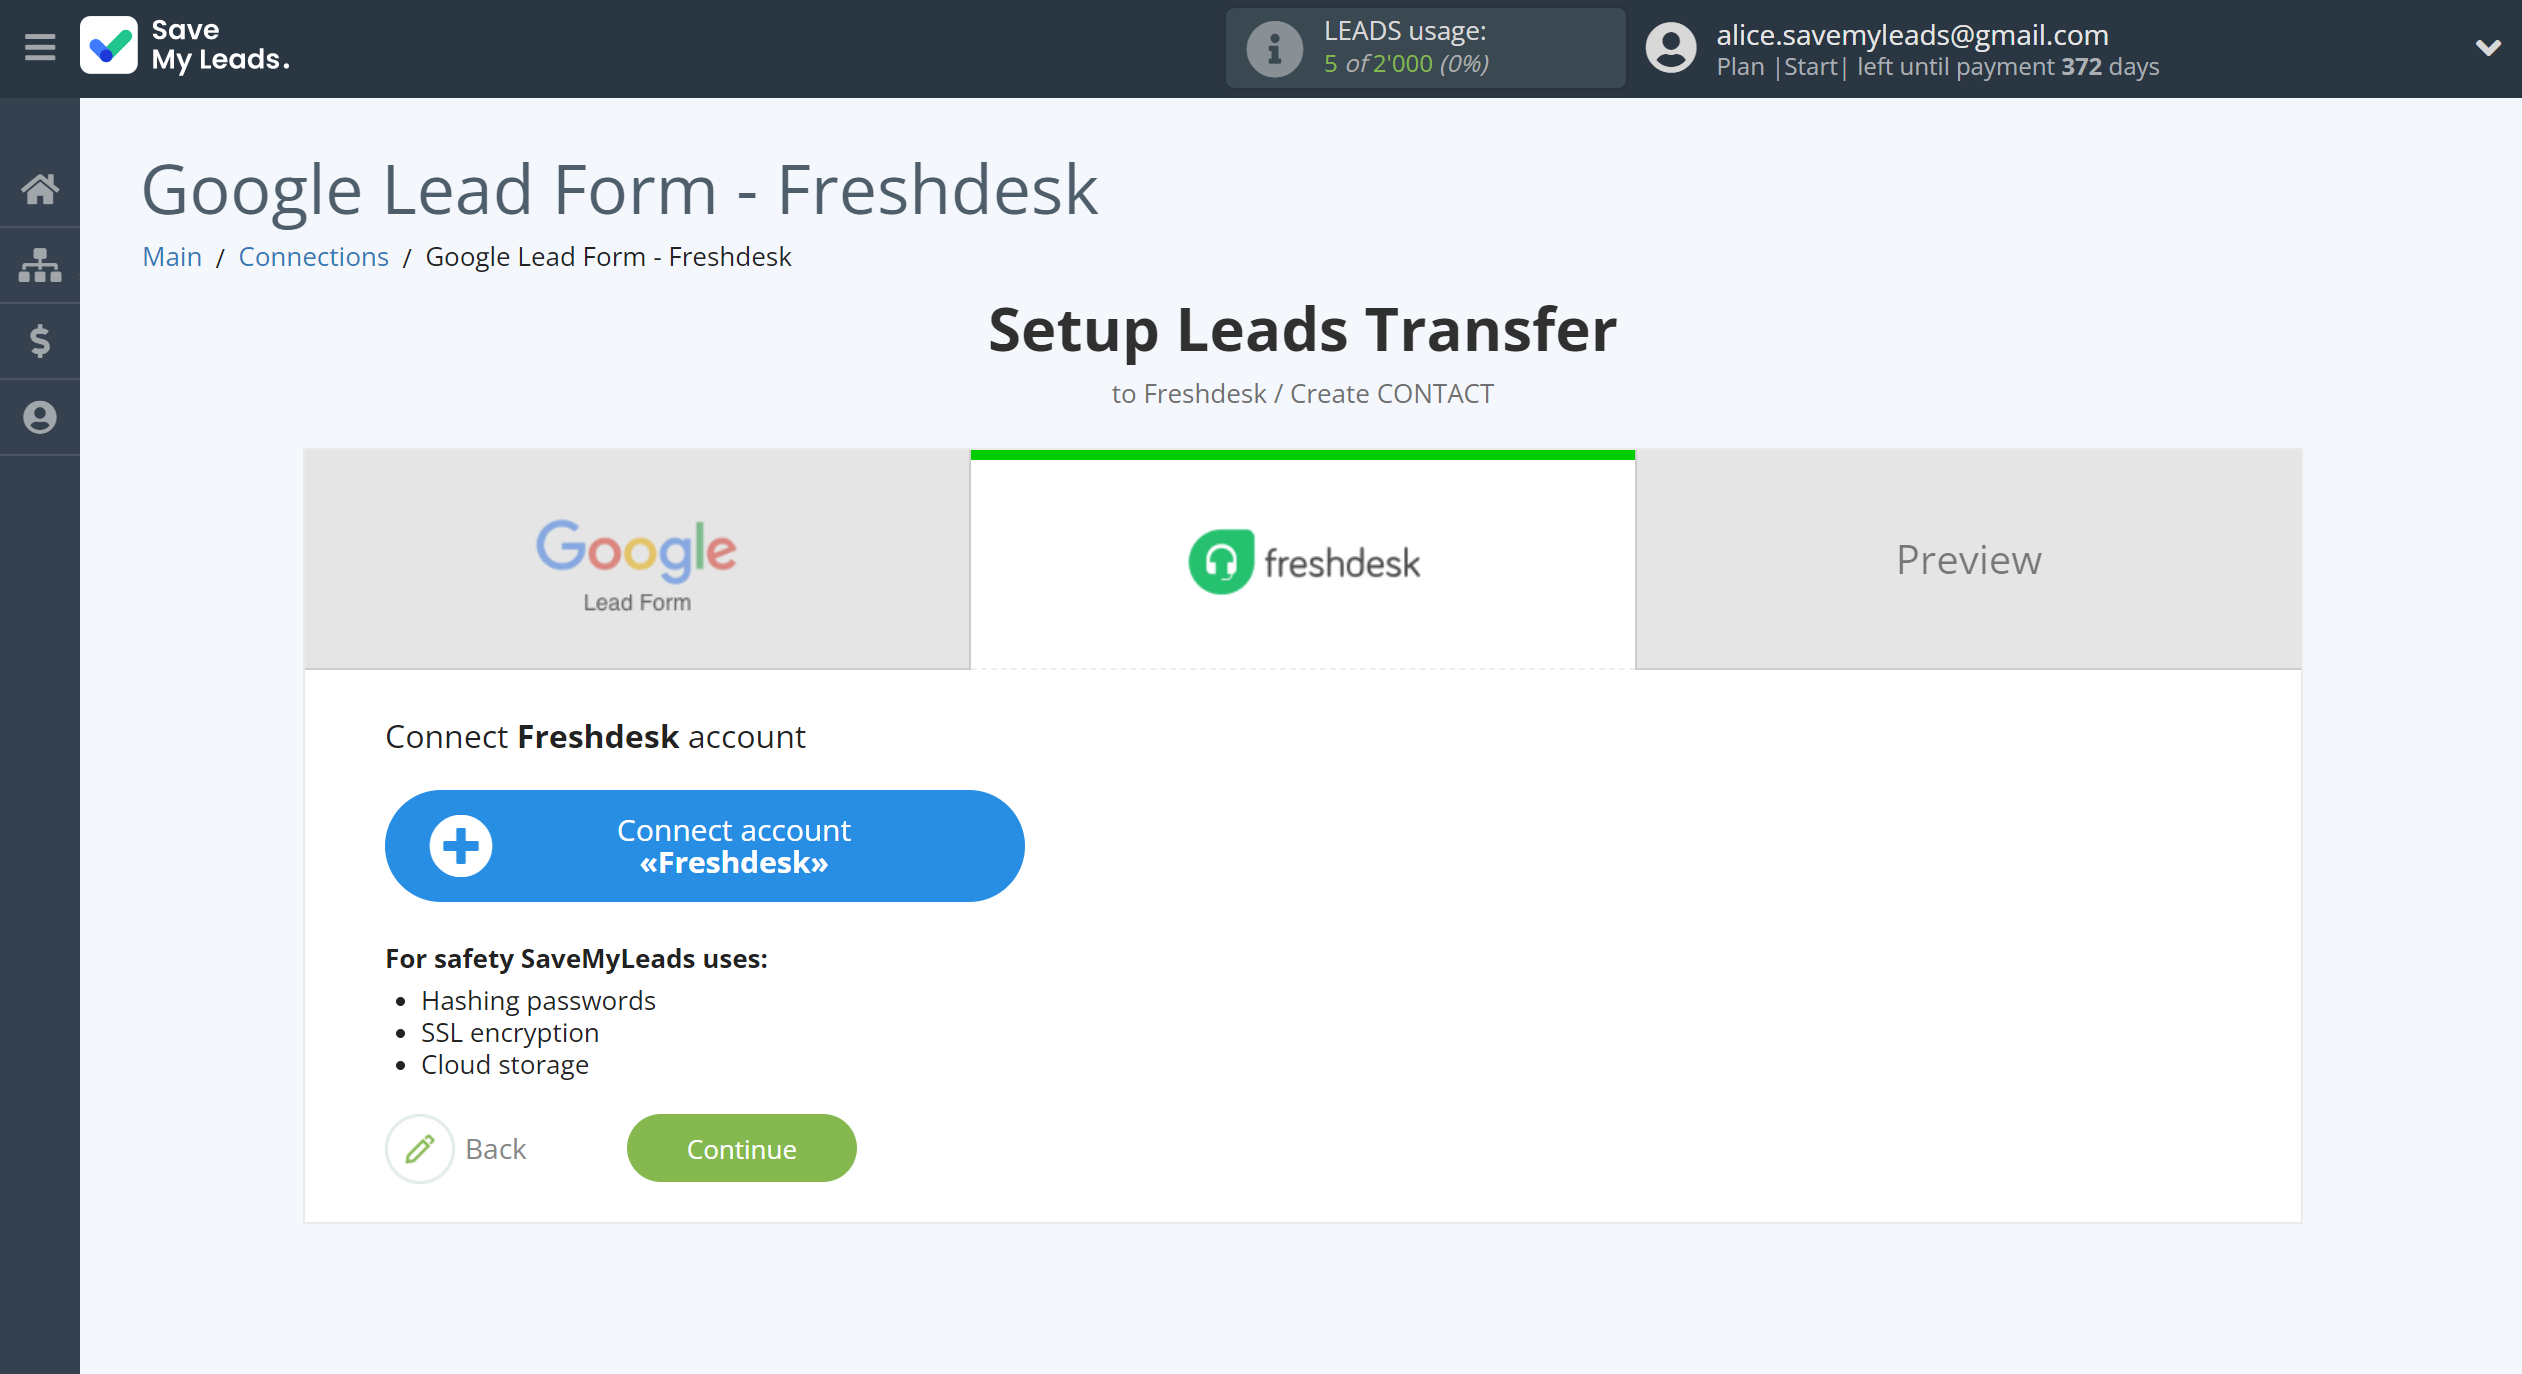 How to Connect Google Lead Form with Freshdesk Create Contacts | Data Destination account connection